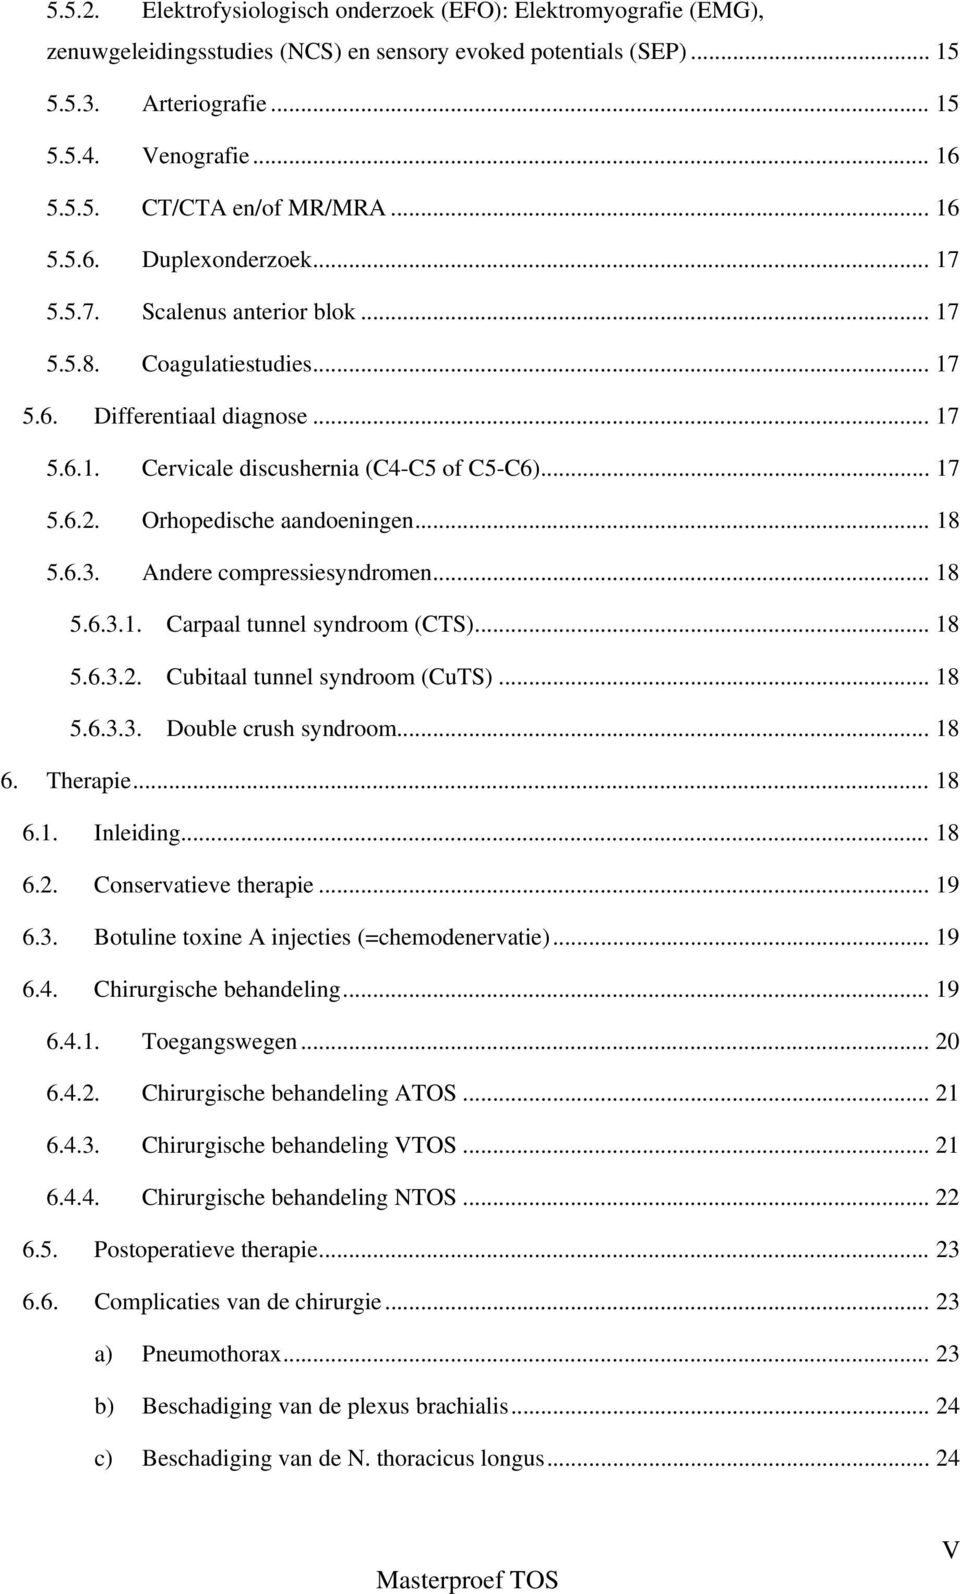 Orhopedische aandoeningen... 18 5.6.3. Andere compressiesyndromen... 18 5.6.3.1. Carpaal tunnel syndroom (CTS)... 18 5.6.3.2. Cubitaal tunnel syndroom (CuTS)... 18 5.6.3.3. Double crush syndroom.